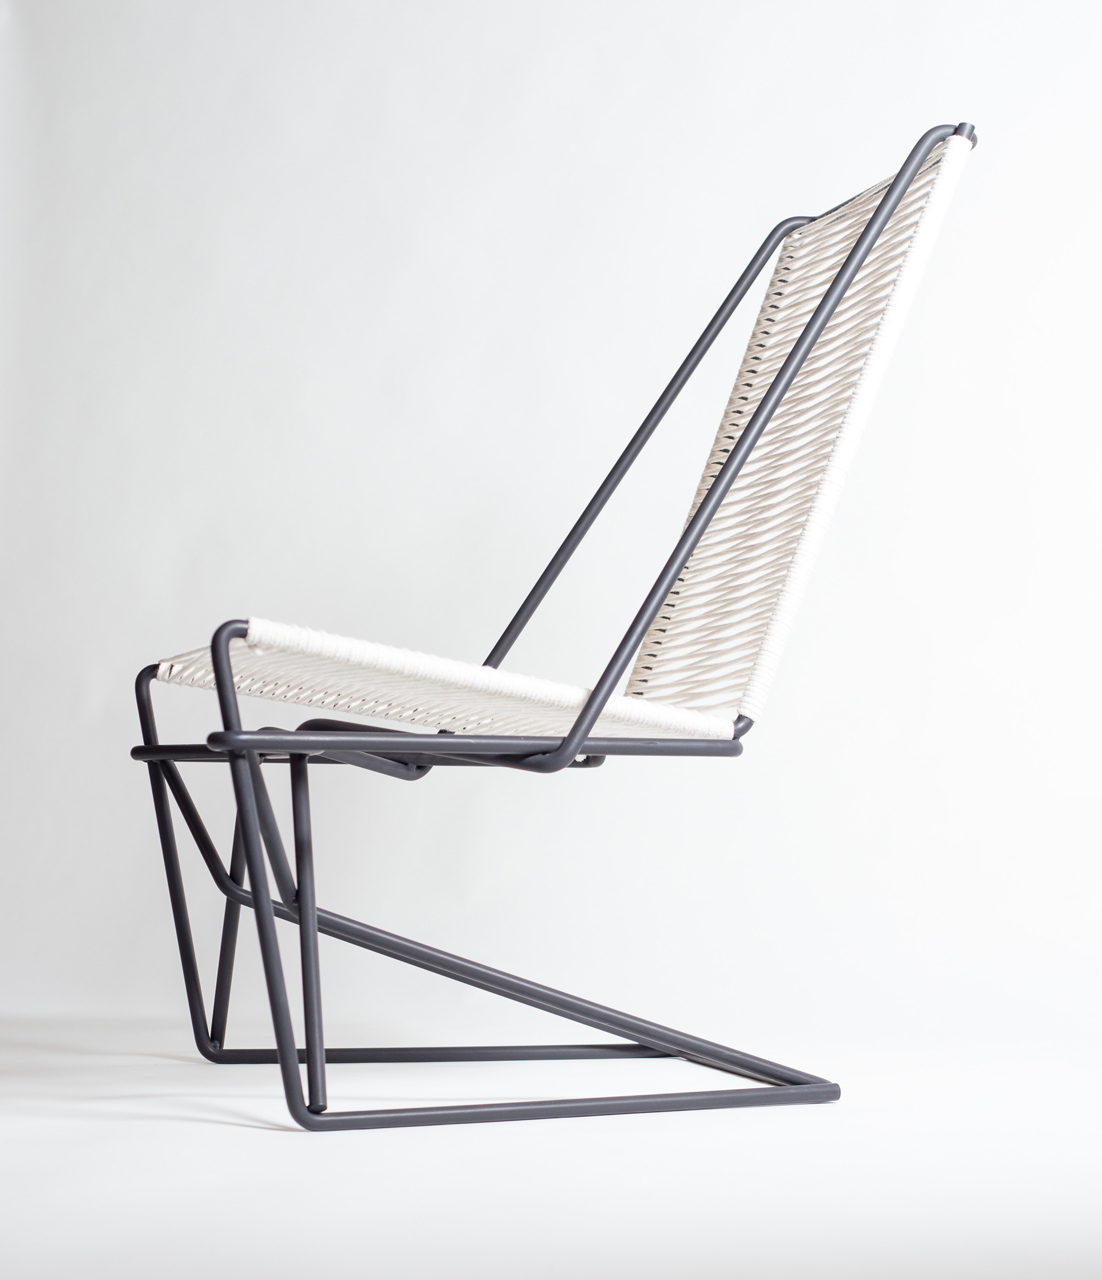 CR45: A Cantilevered Chair by Many Hands Design